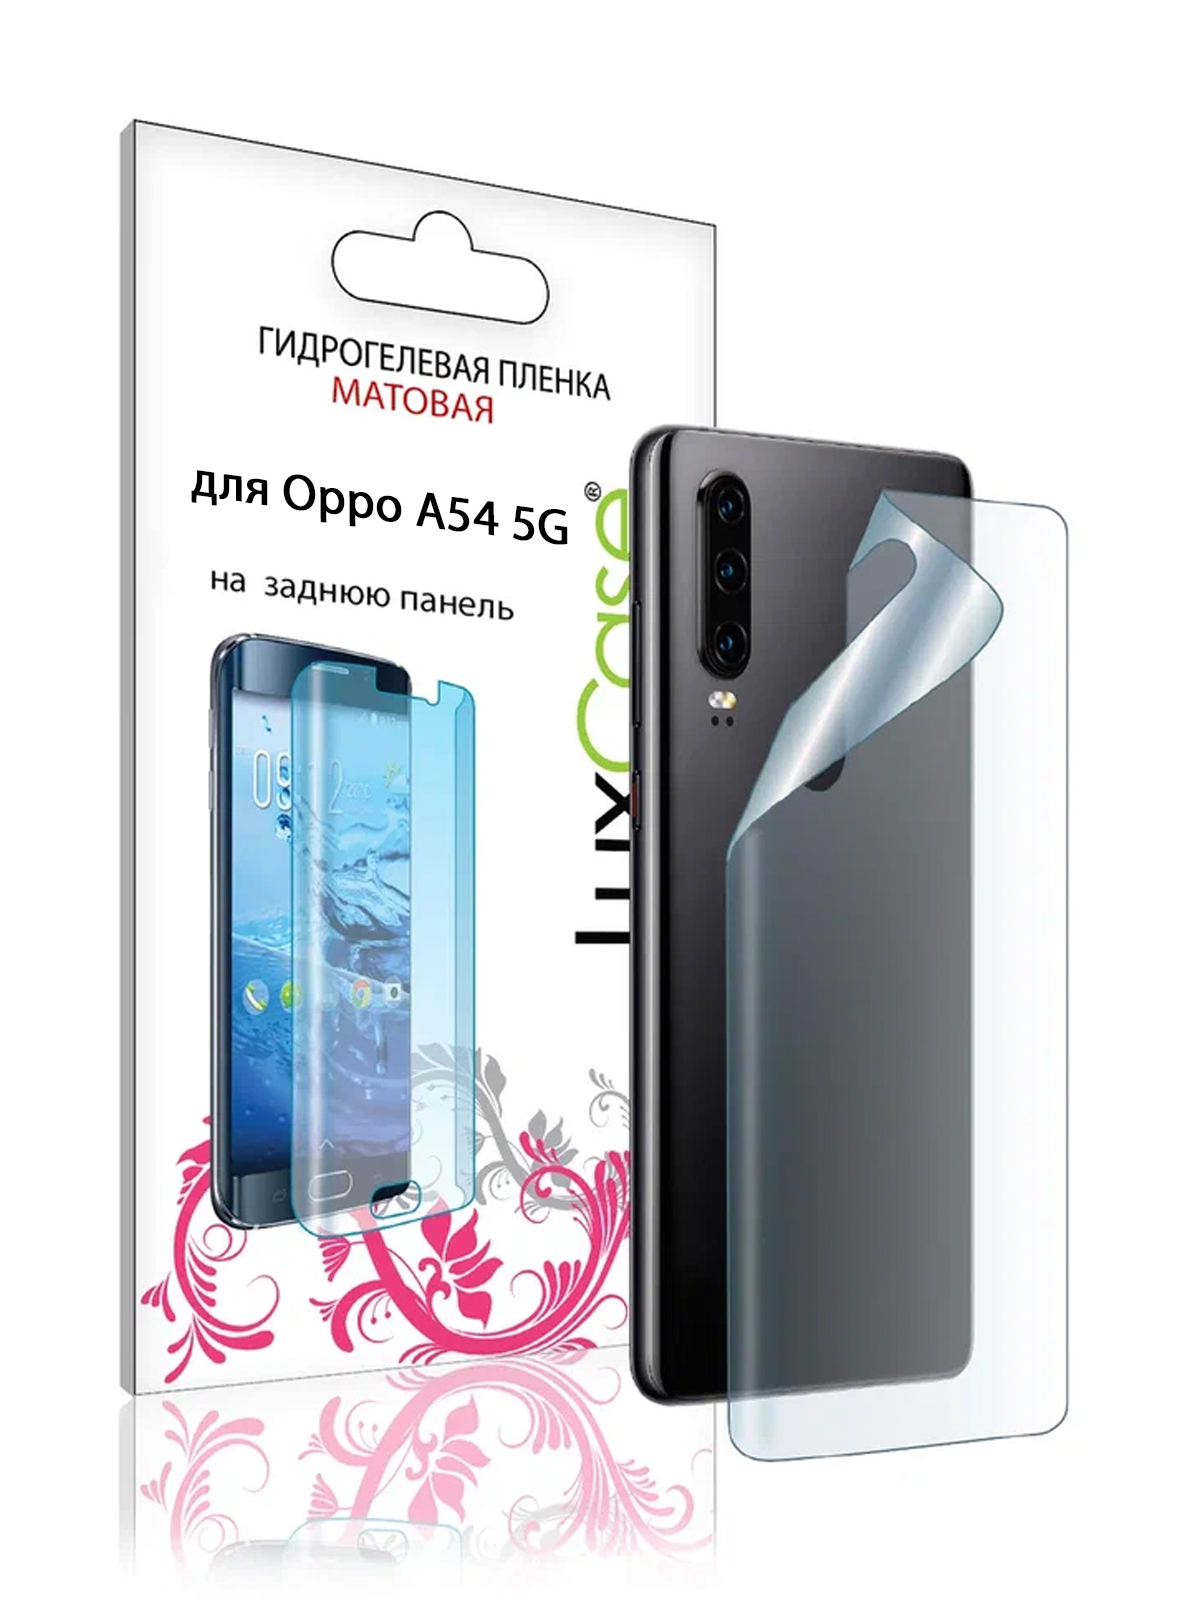 Гидрогелевая пленка LuxCase для Oppo A54 5G 0.14mm Back Matte 90349 гидрогелевая пленка luxcase для oppo a54 5g 0 14mm front and back matte 90350